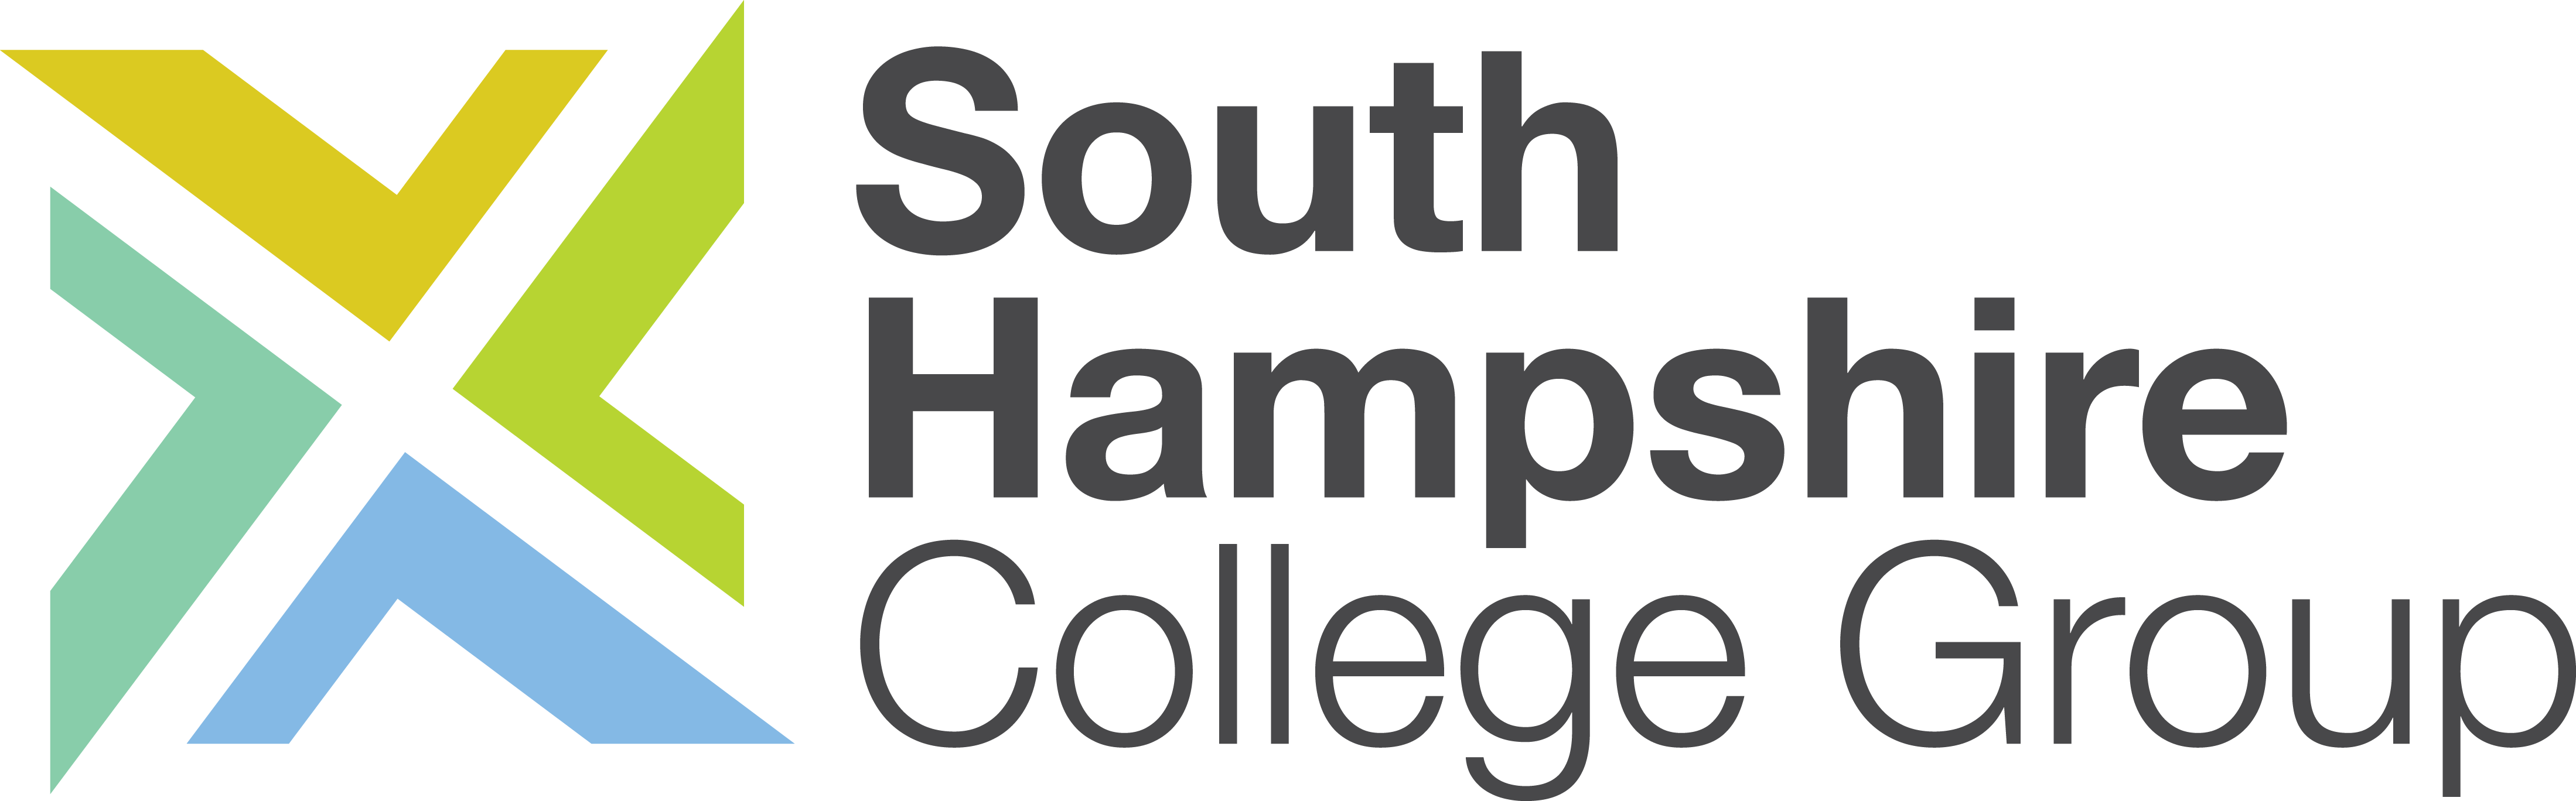 South Hampshire College Group logo